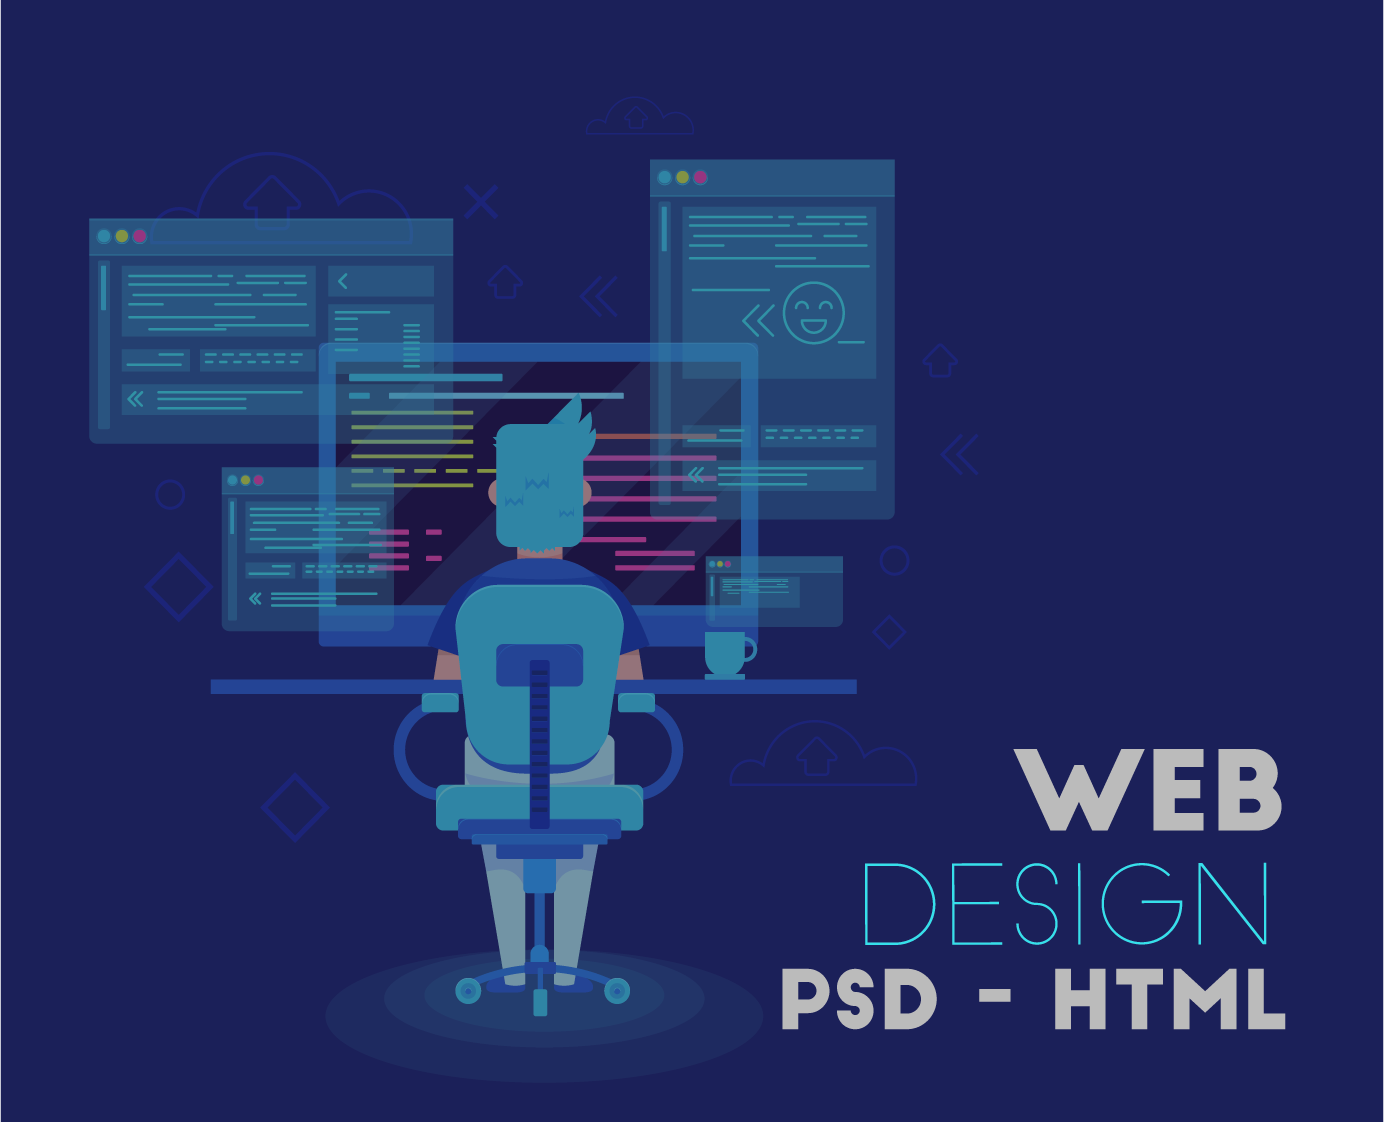 The process to convert PSD image file to HTML code (Part 1) | by Alaila  Ladera | typeiqs | Medium